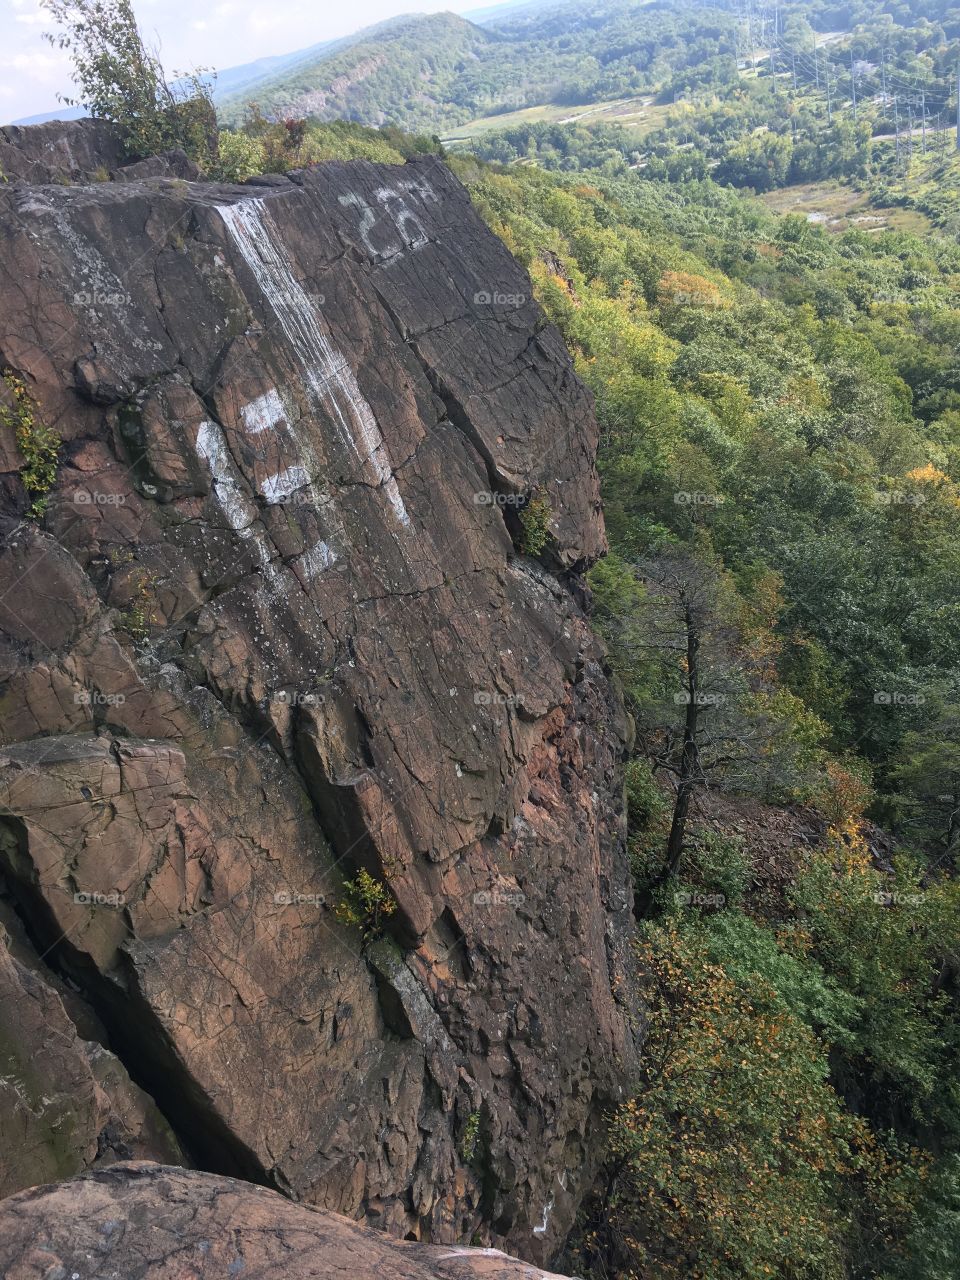 Graffiti on top of the mountain
